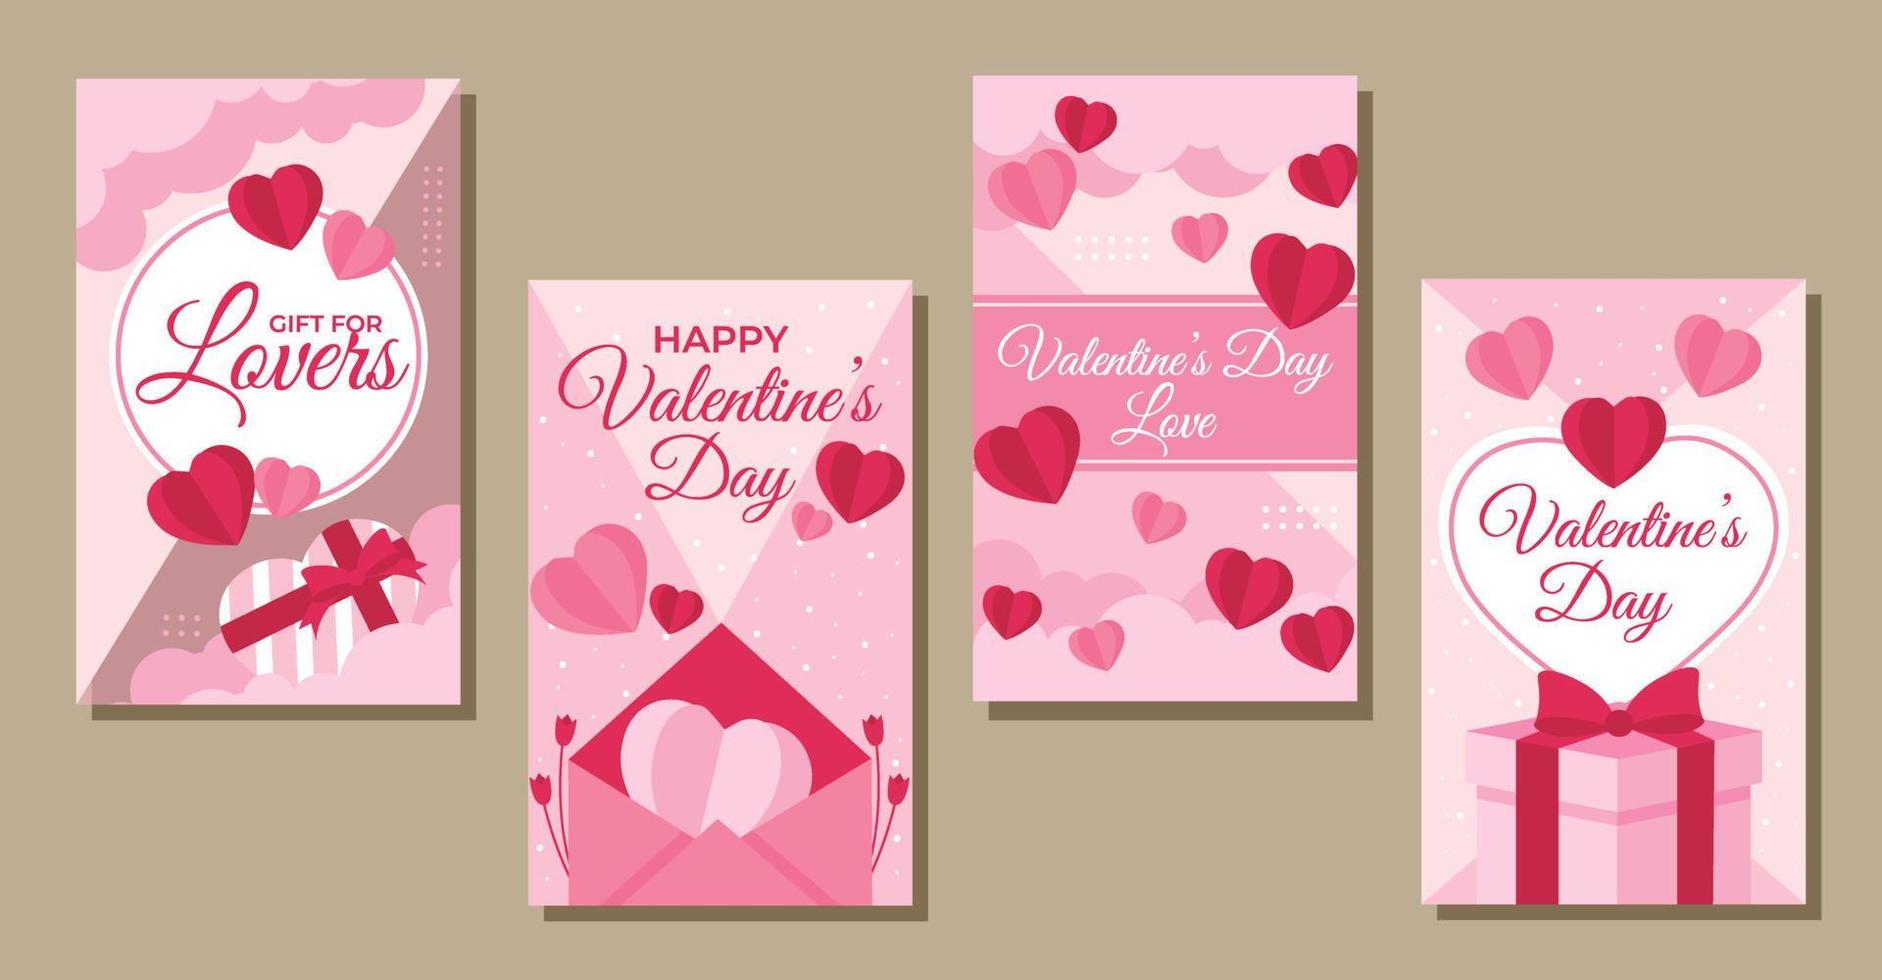 Happy Valentine's Day Cards Collection vector